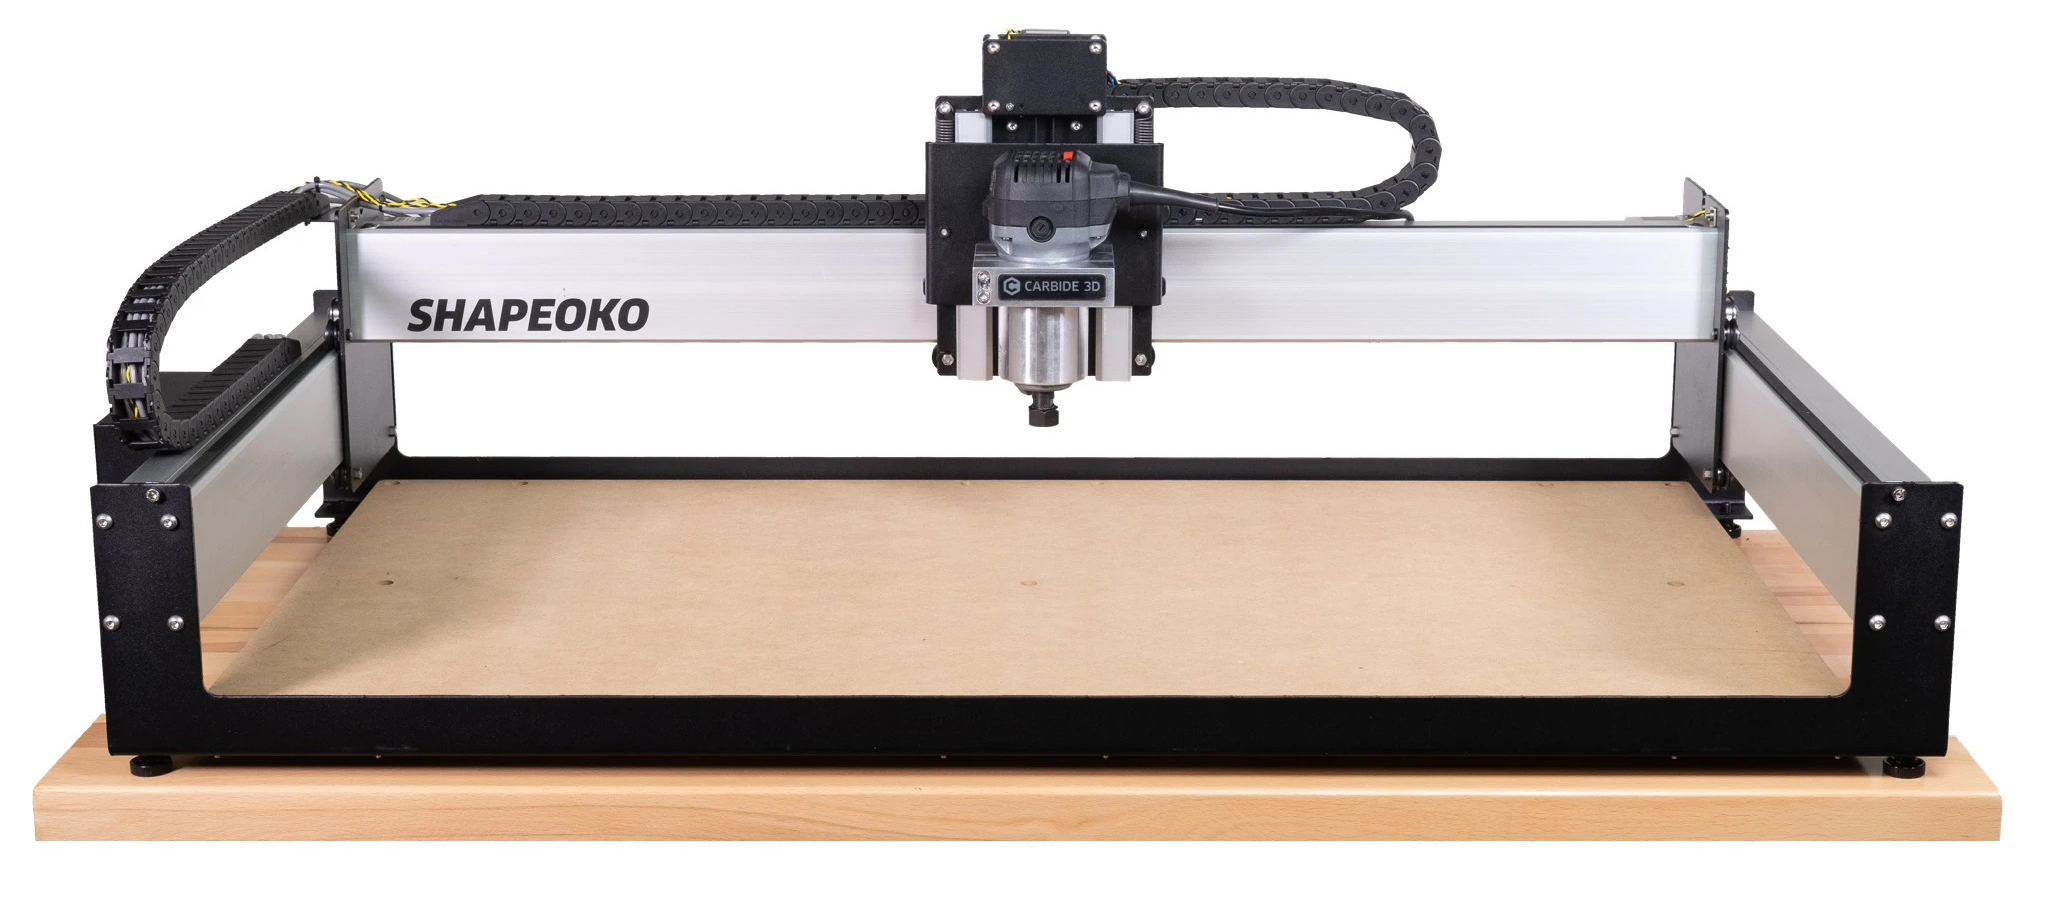 Carbide 3D Shapeoko XL Z-Plus No Router 69mm - Click to Enlarge